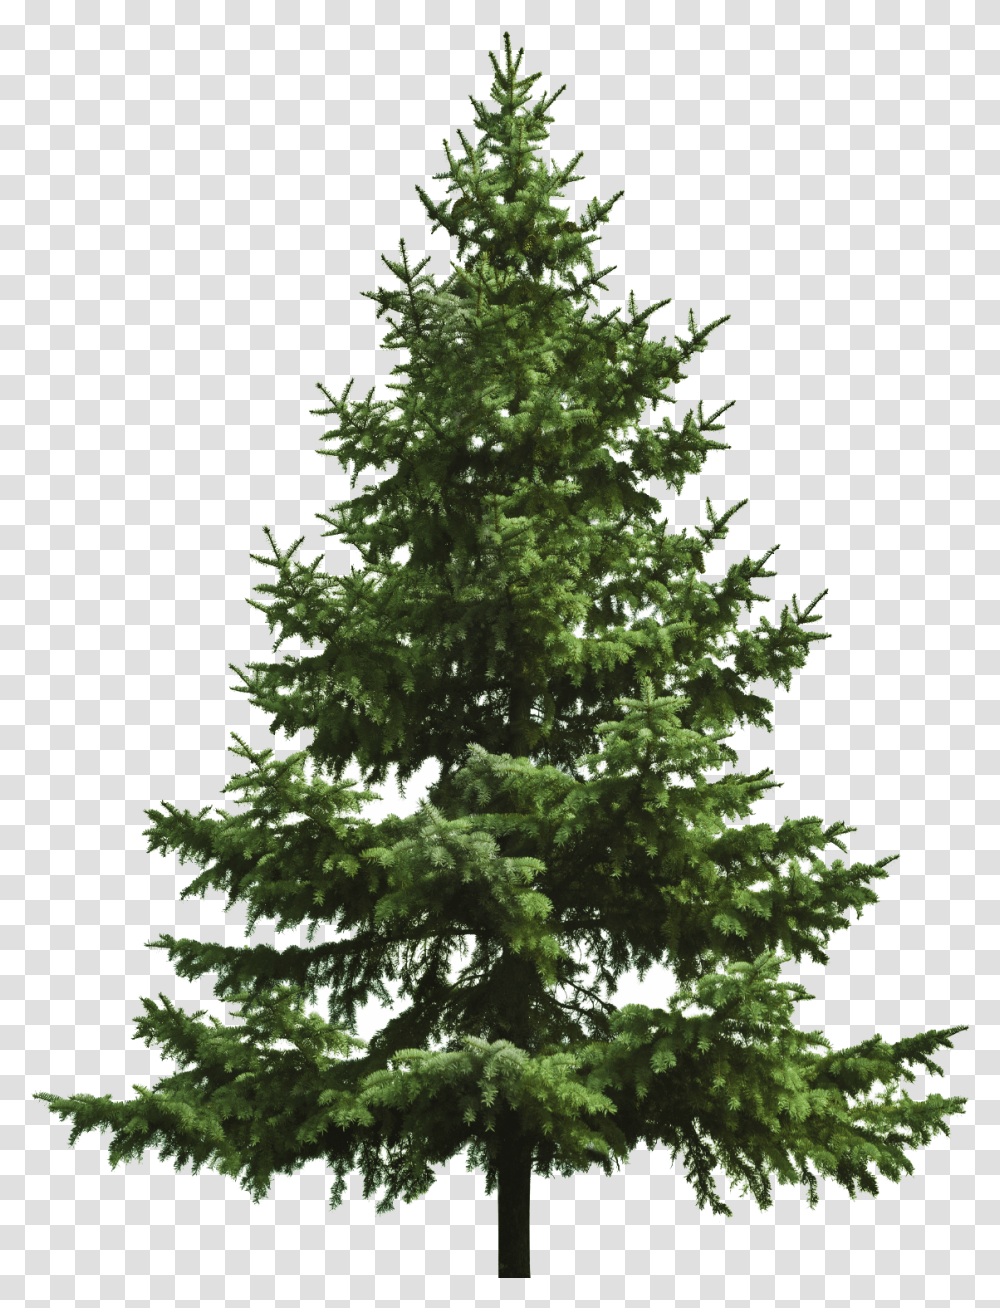 Free Download Of Christmas Tree Icon Clipart Pine Tree, Plant, Ornament, Fir, Abies Transparent Png